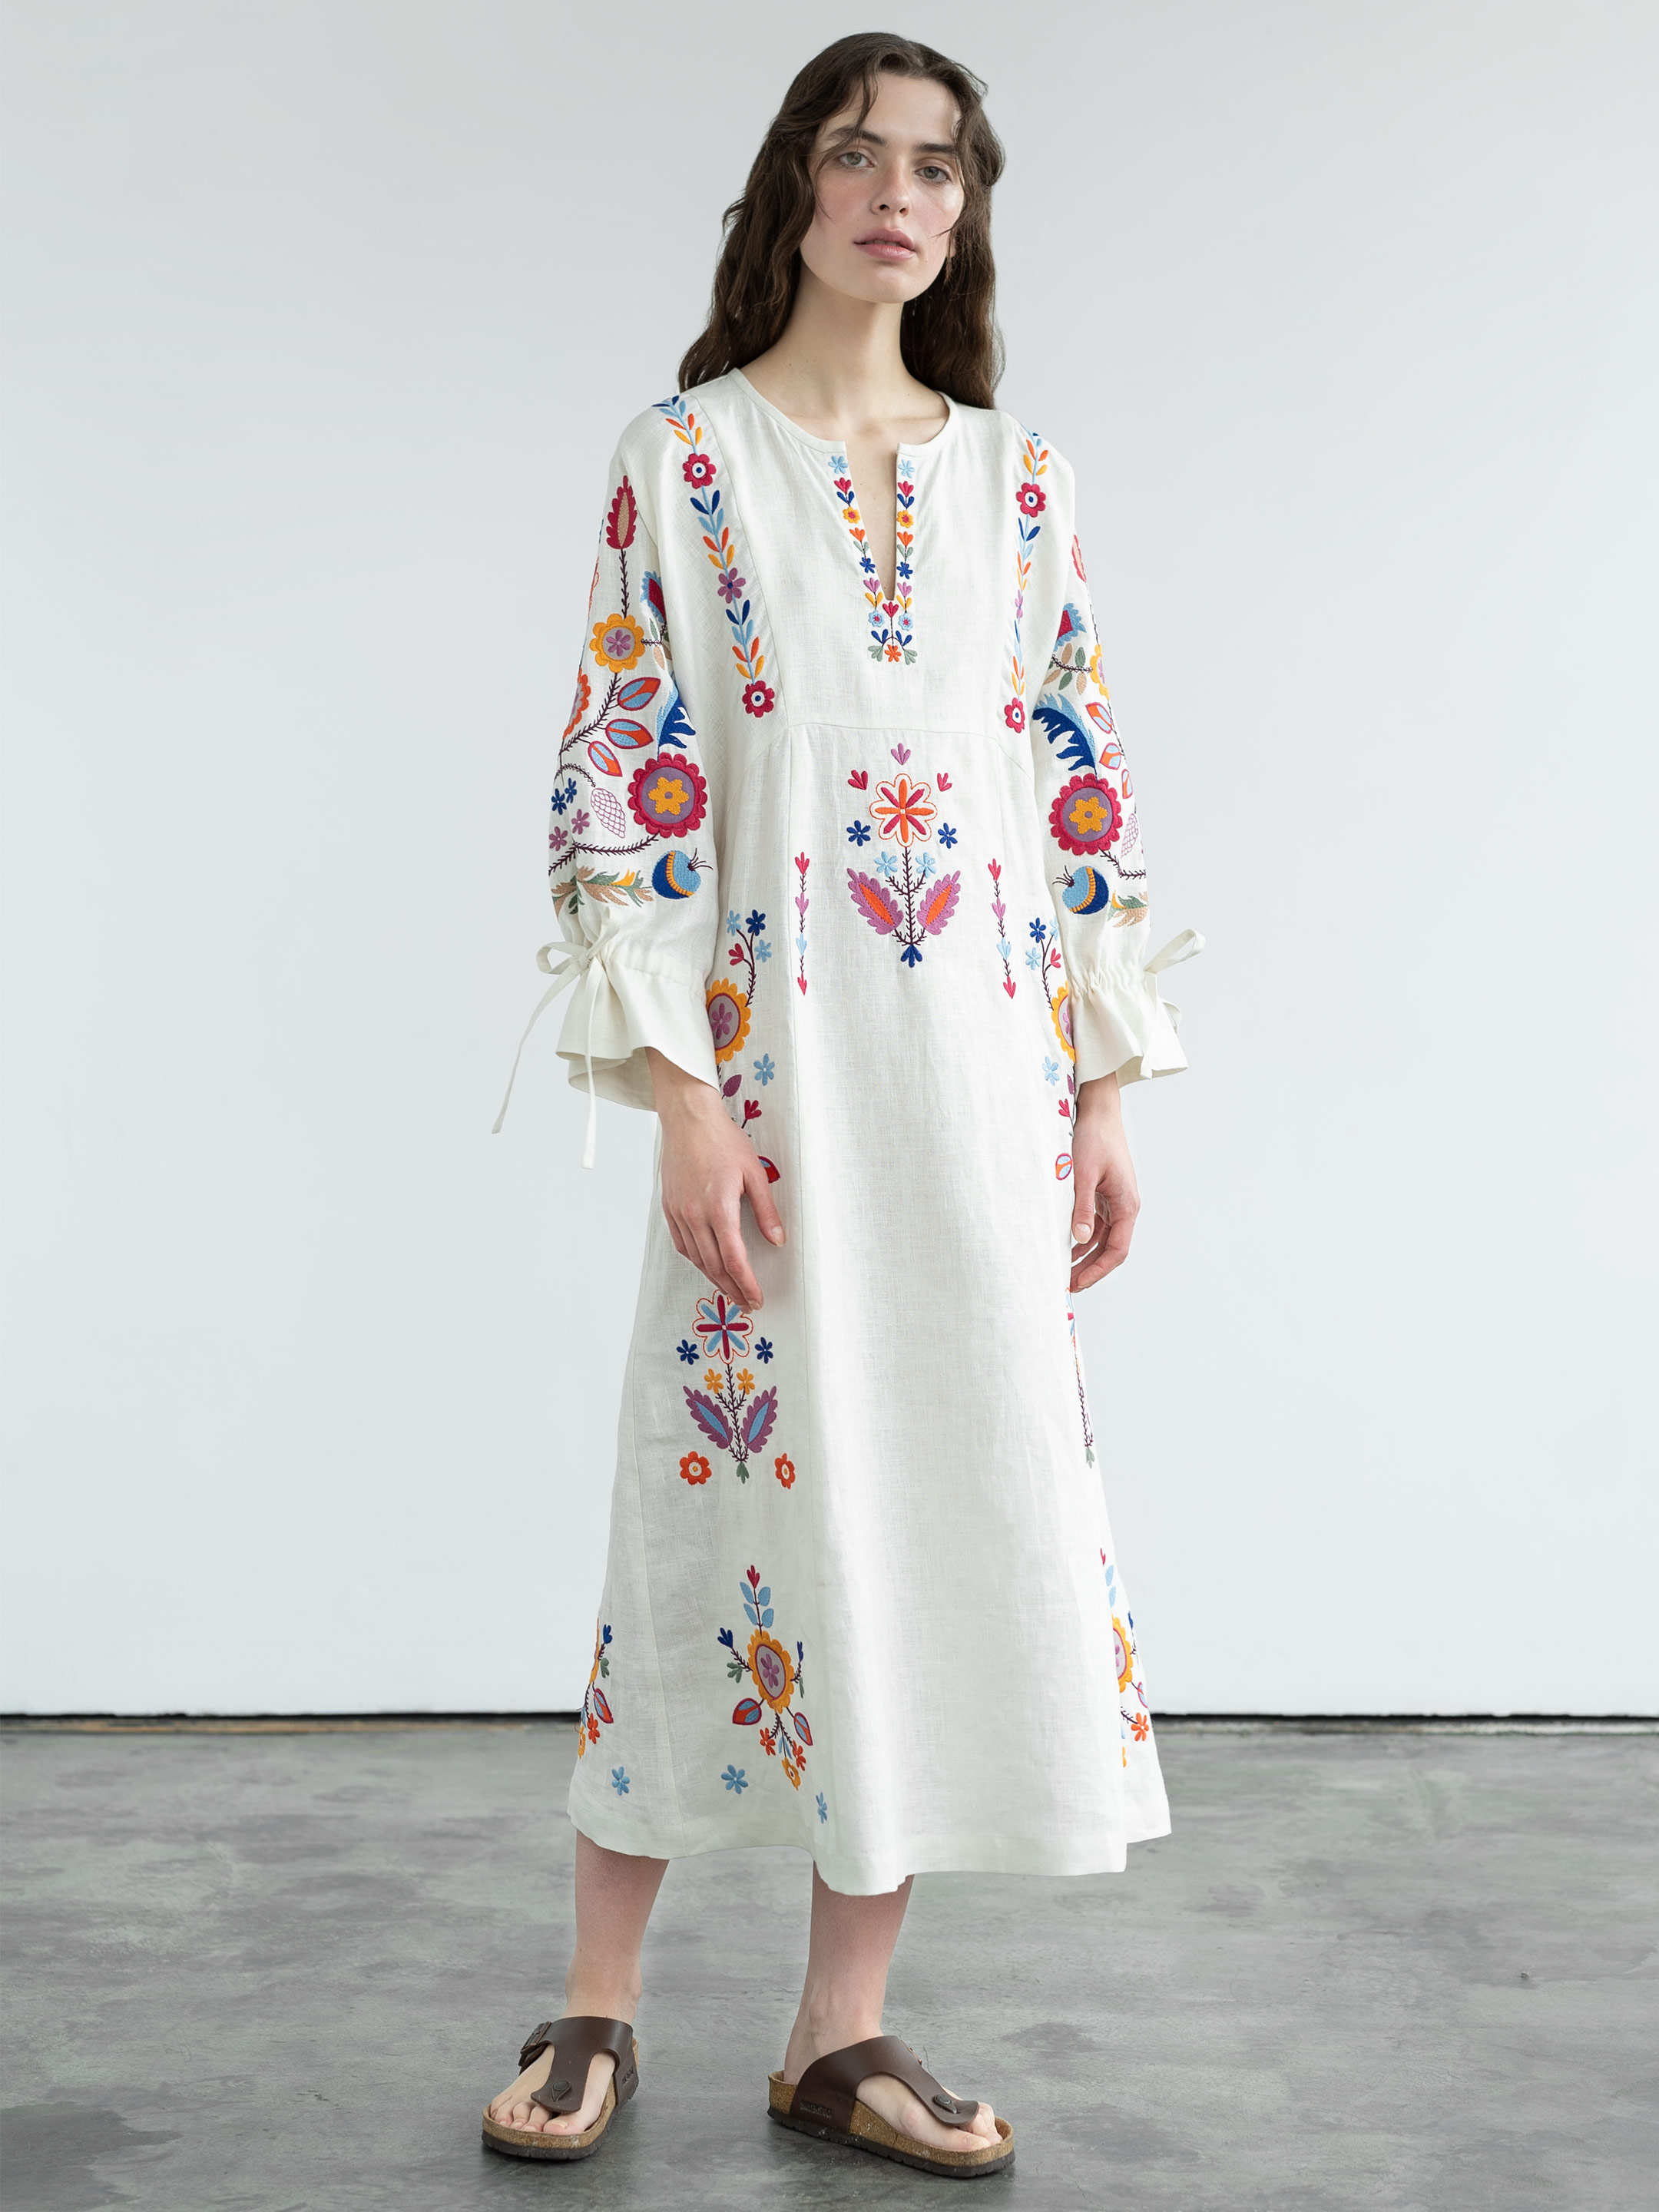 White linen dress with floral embroidery Sobachko - photo 1